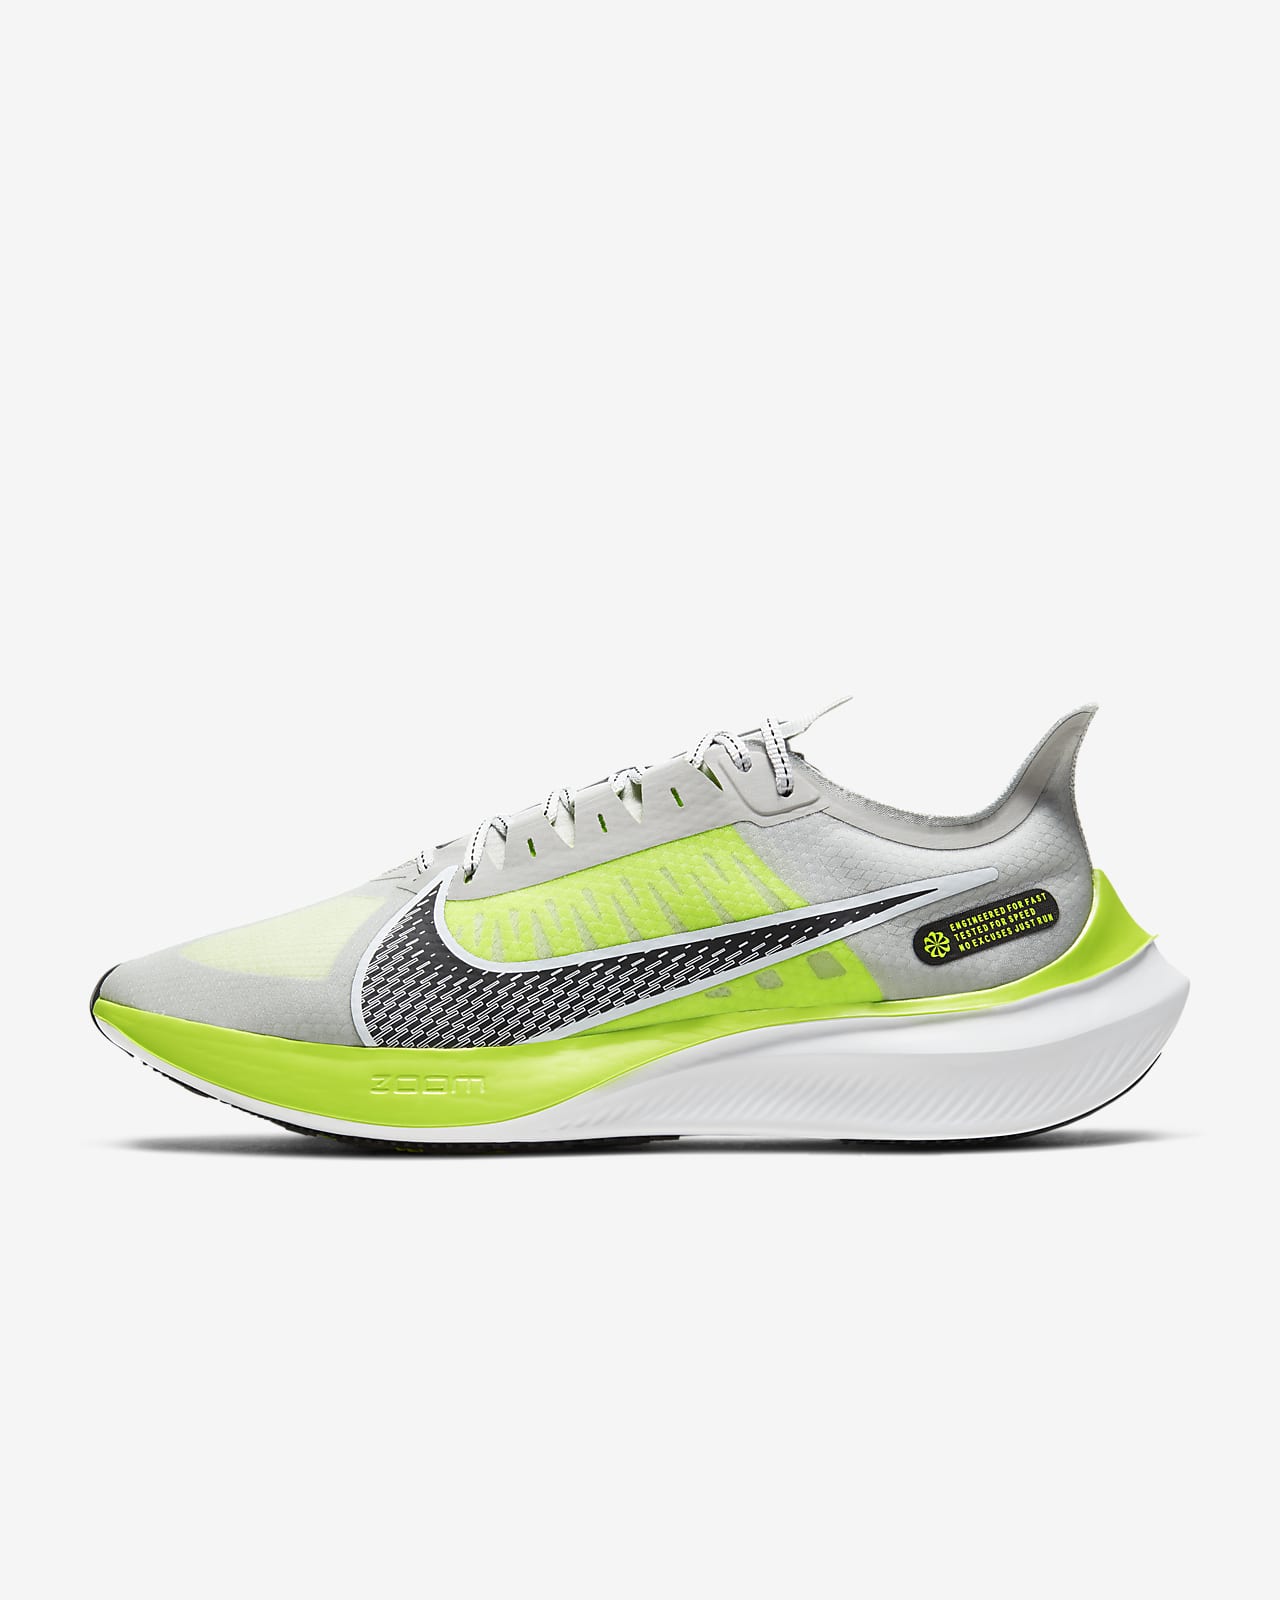 nike zoom shoes price in india 2020